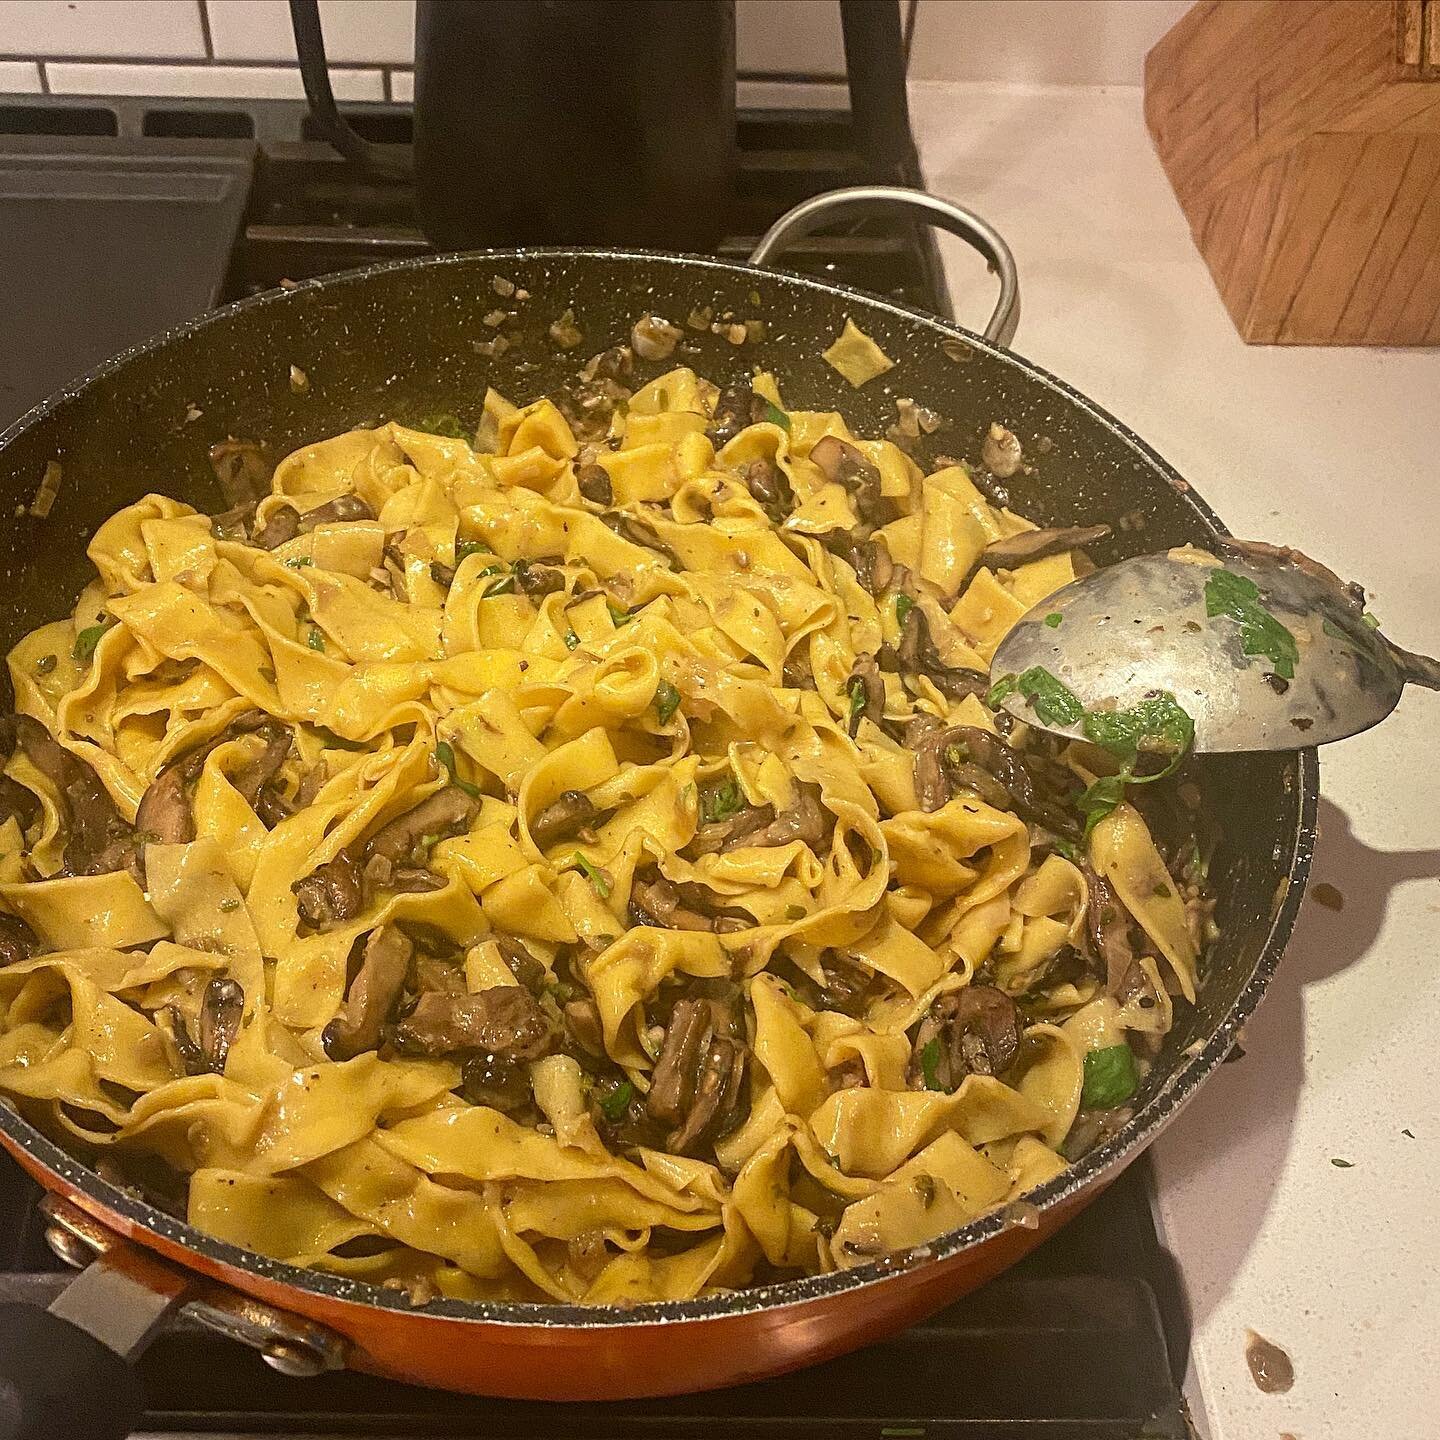 This hamburger helper lookin muhfucker is tagliatelle ai funghi. We hand rolled and cut the pasta.. wasn&rsquo;t as consistent as a rolling machine but fun for a change. Cooked the mushrooms down in a white wine sauce 🤤